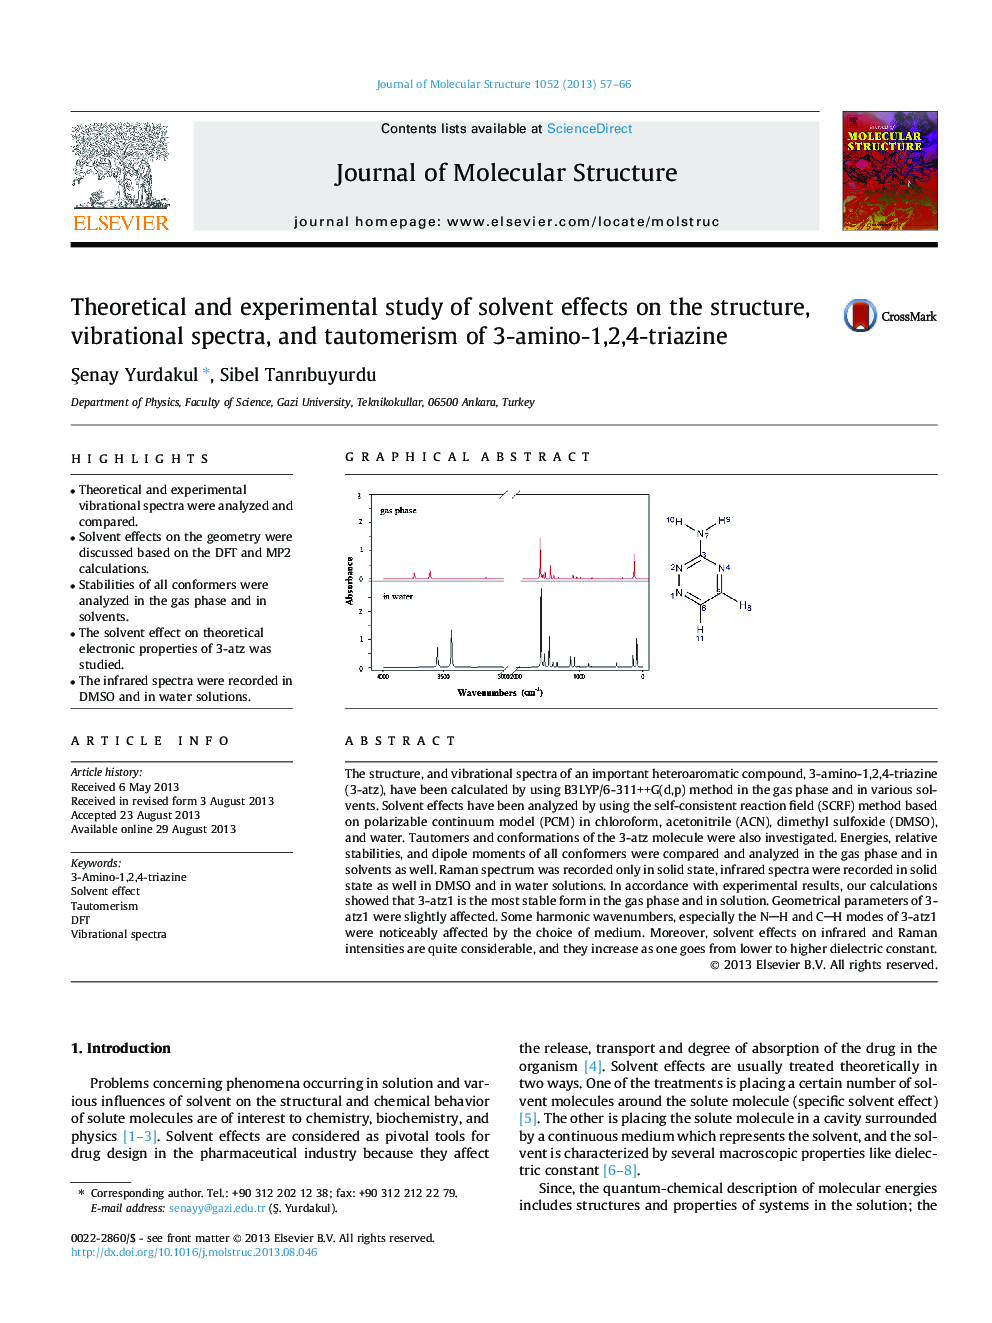 Theoretical and experimental study of solvent effects on the structure, vibrational spectra, and tautomerism of 3-amino-1,2,4-triazine